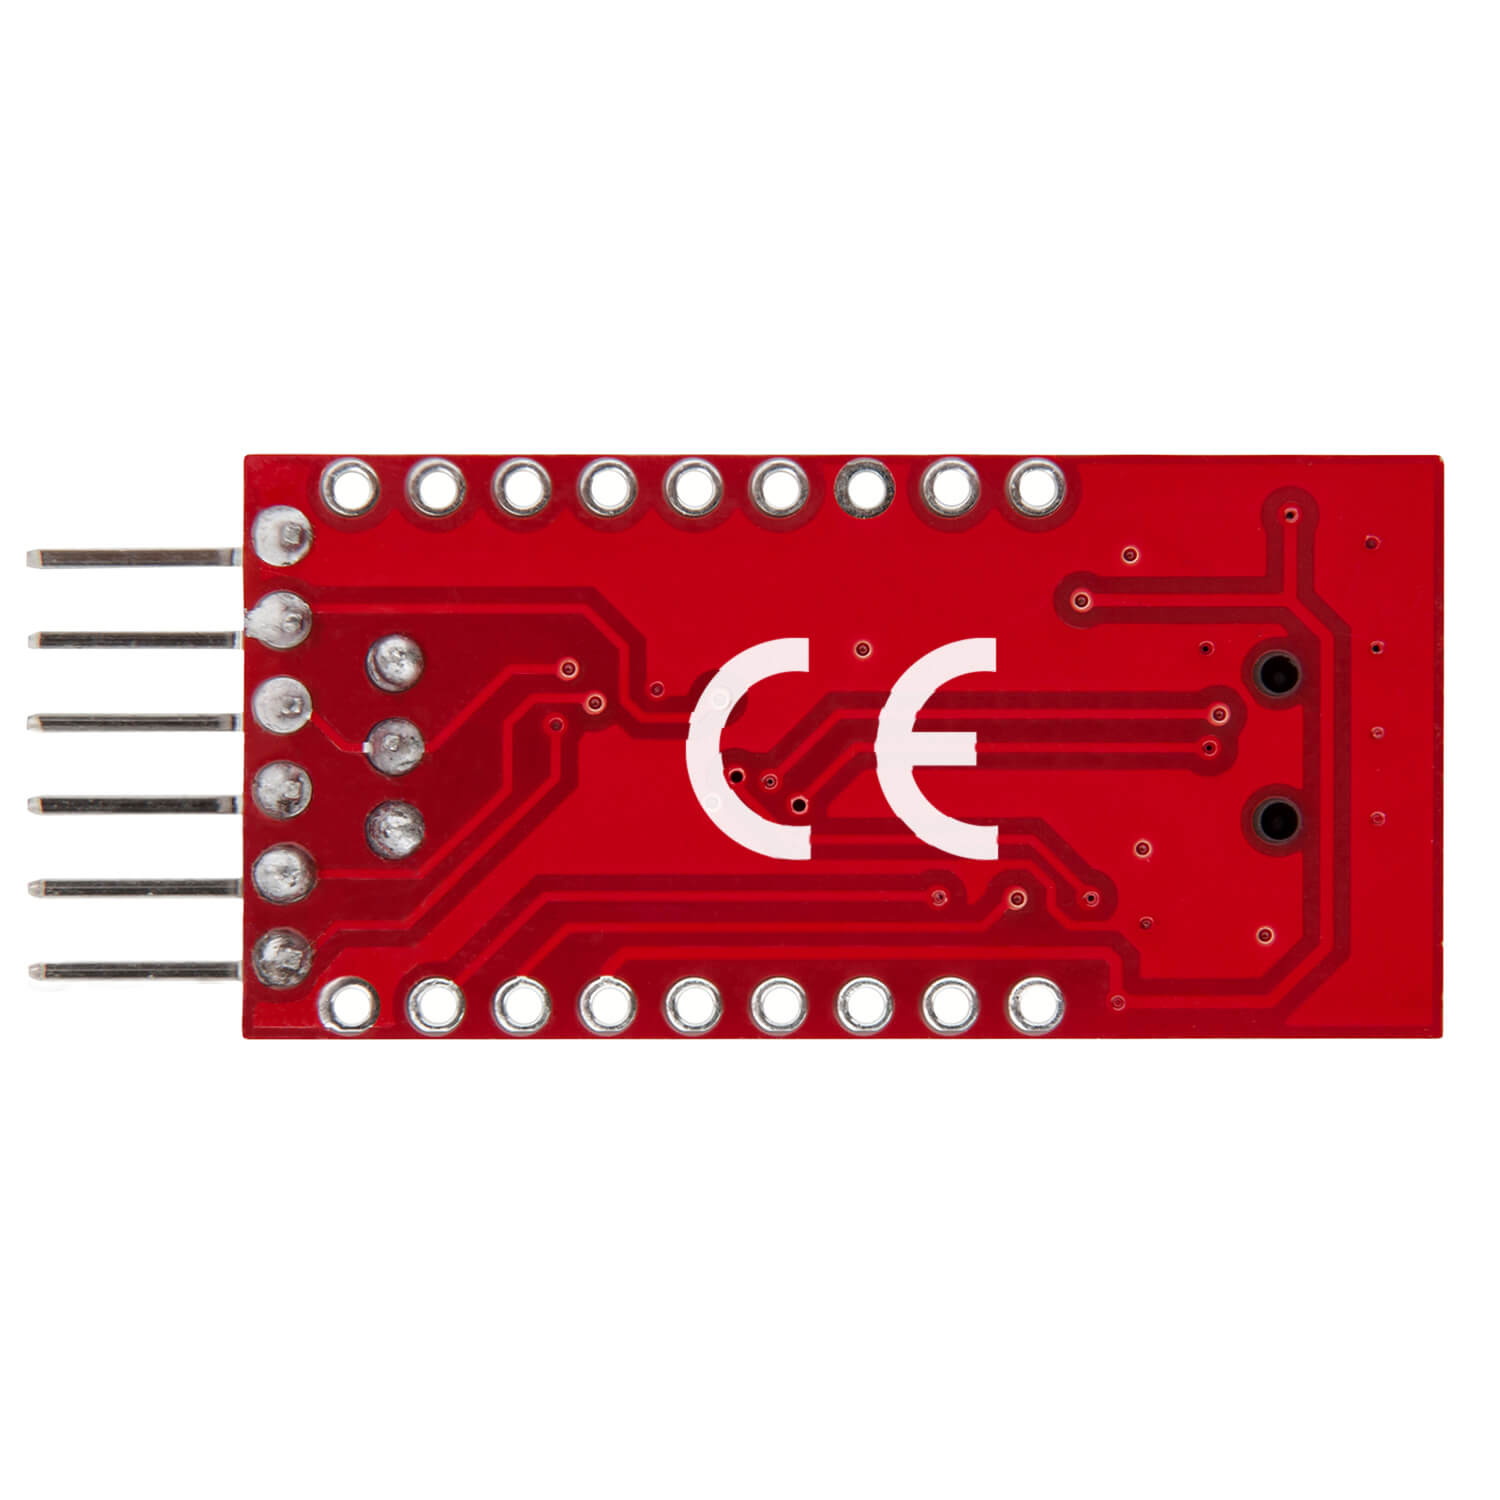 Breadboard Power Supply 3.3V and 5V with Micro USB Connector and FT232RL  Chip for Arduino